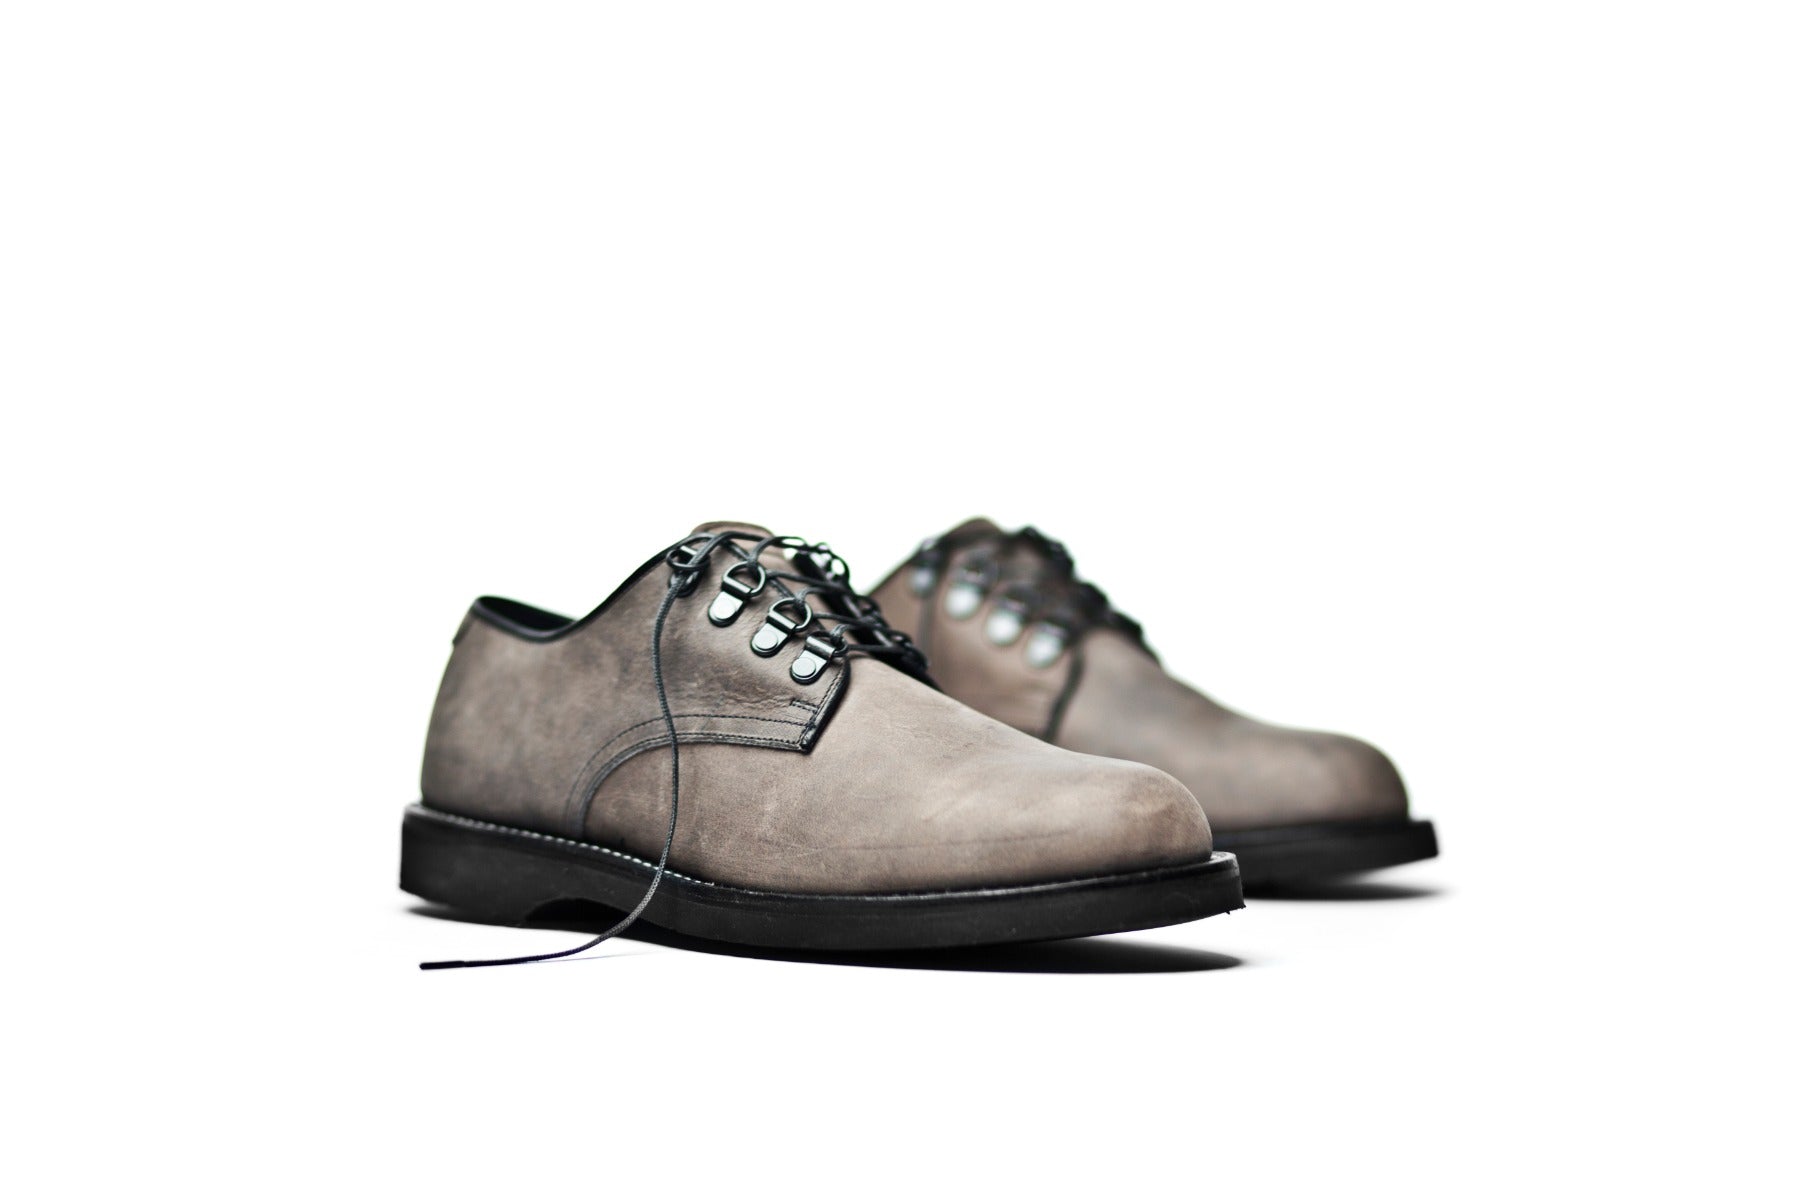 A pair of gray suede Oxford-style lace-up Billy shoes with black soles on a white background by Broken Homme.